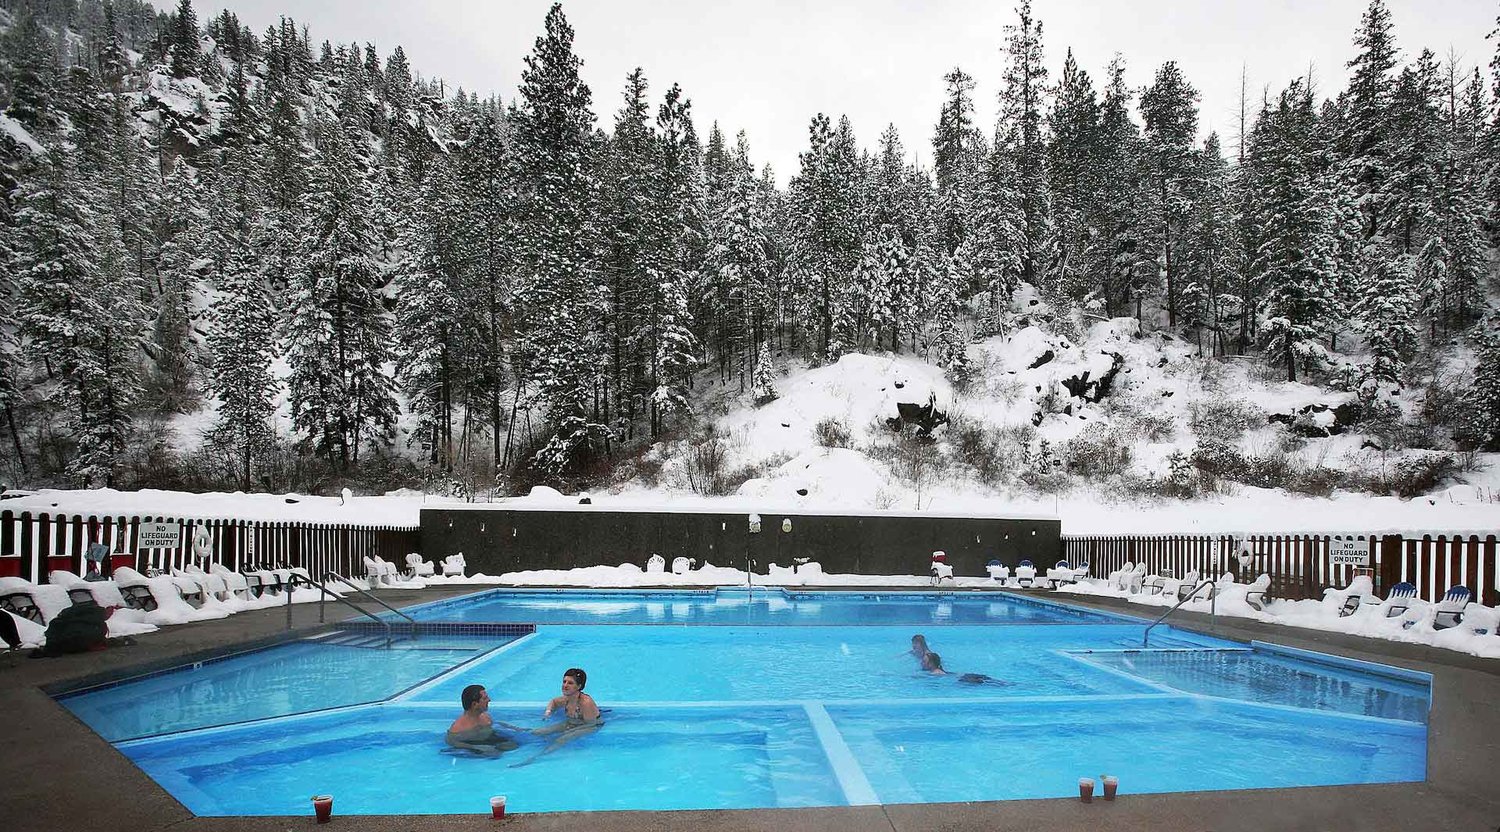 People soaking in the pool at Quinns with snow-covered trees in the background